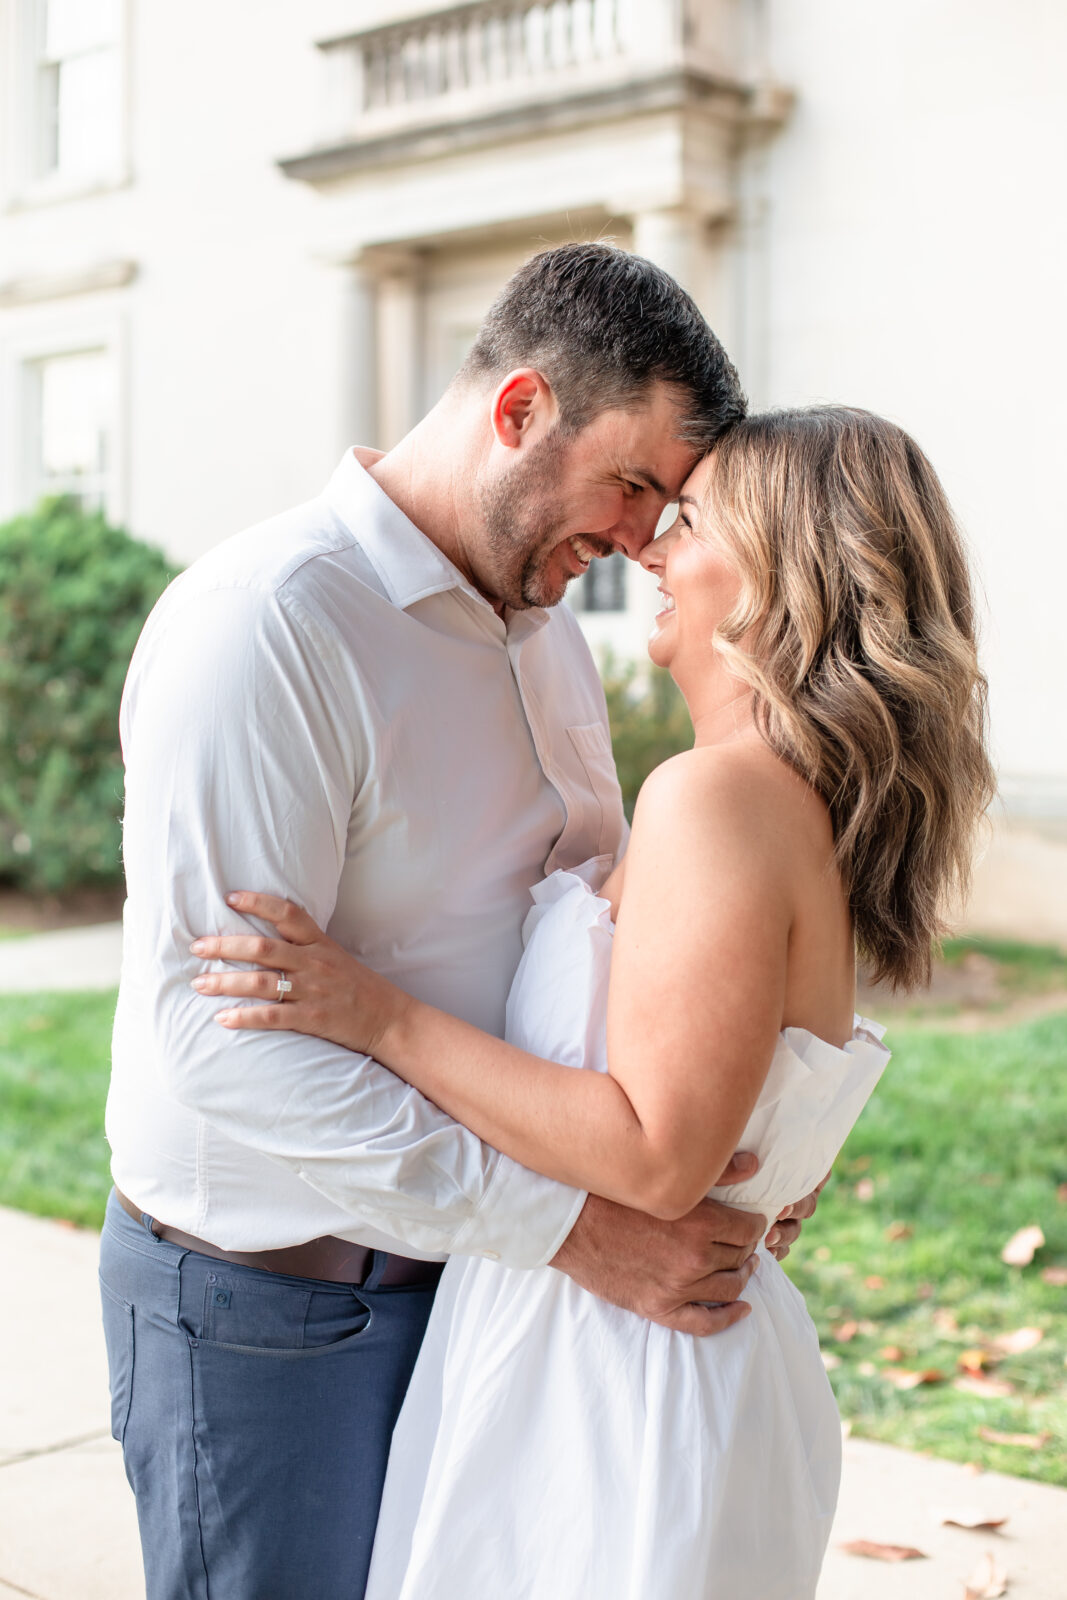 Couple touching foreheads in a loving pose during their engagement shoot.